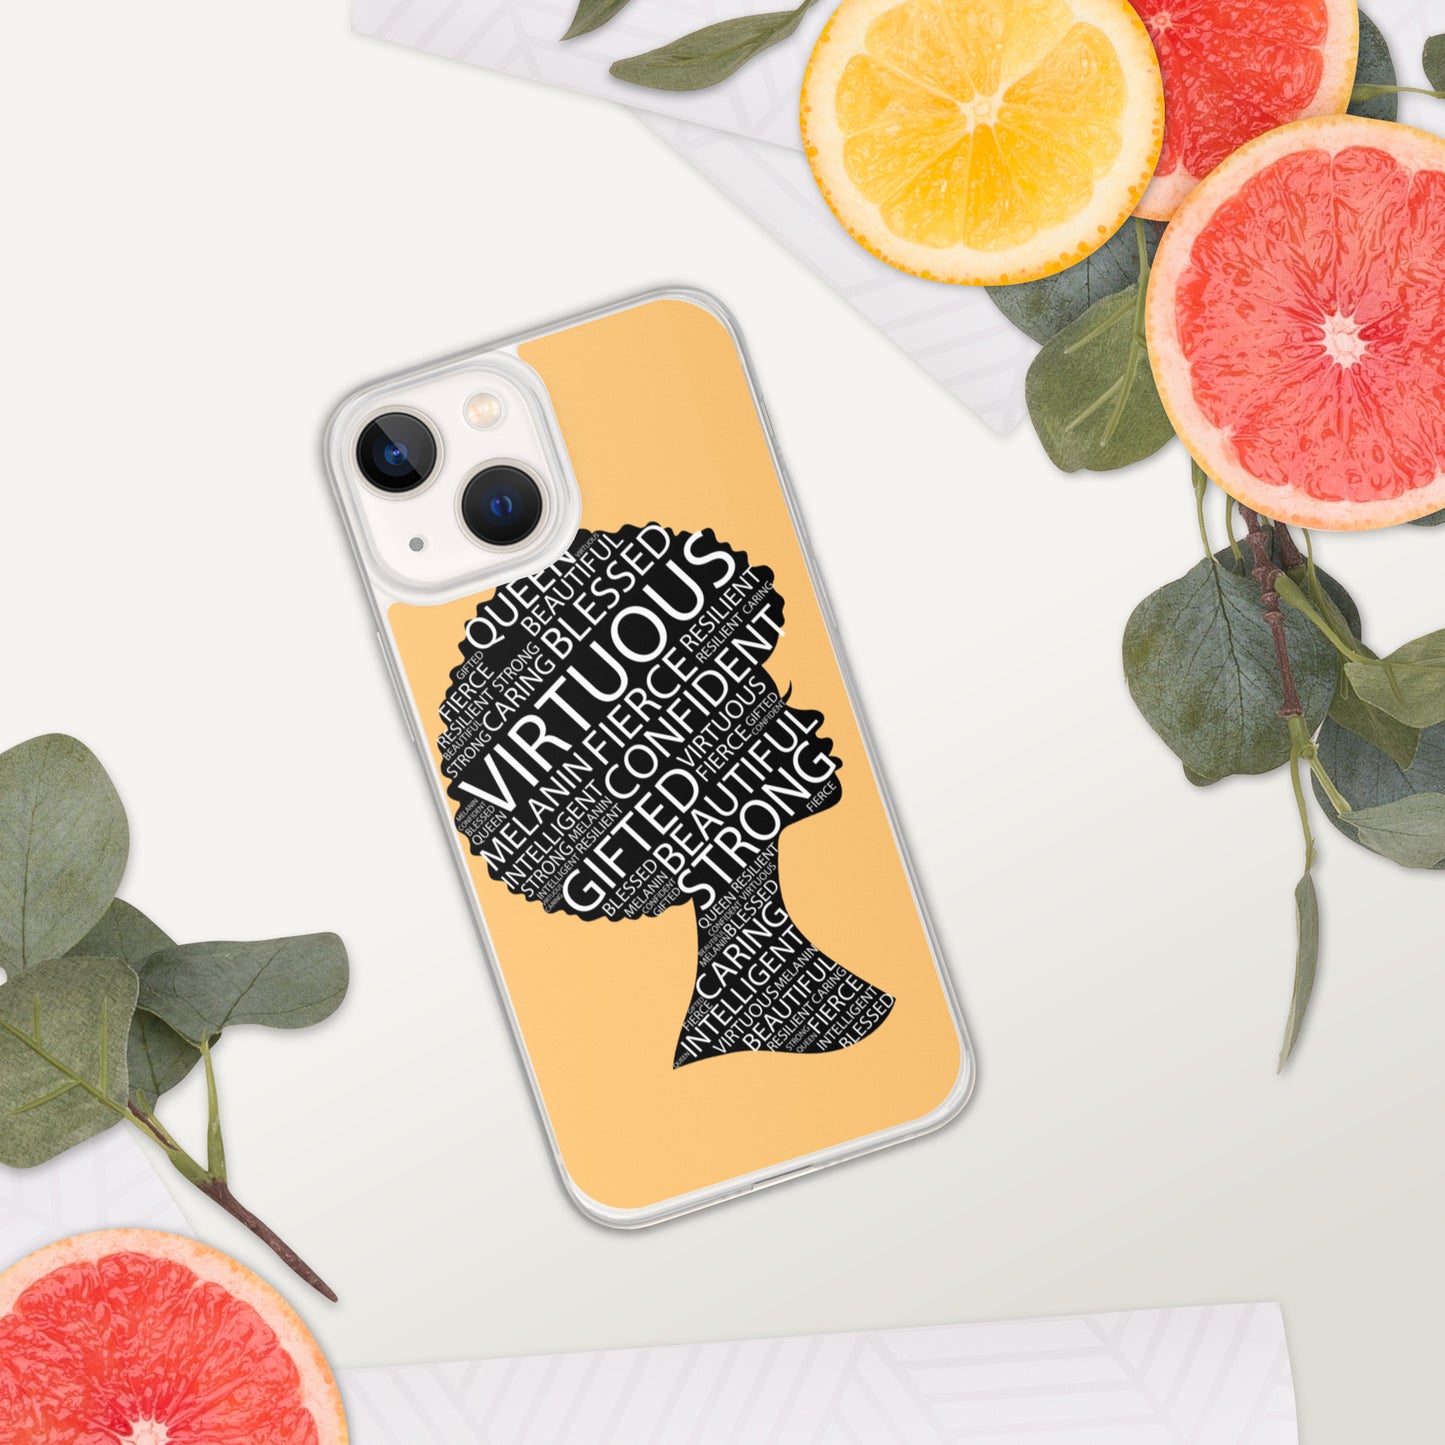 Woman of Virtue v2 iPhone Case